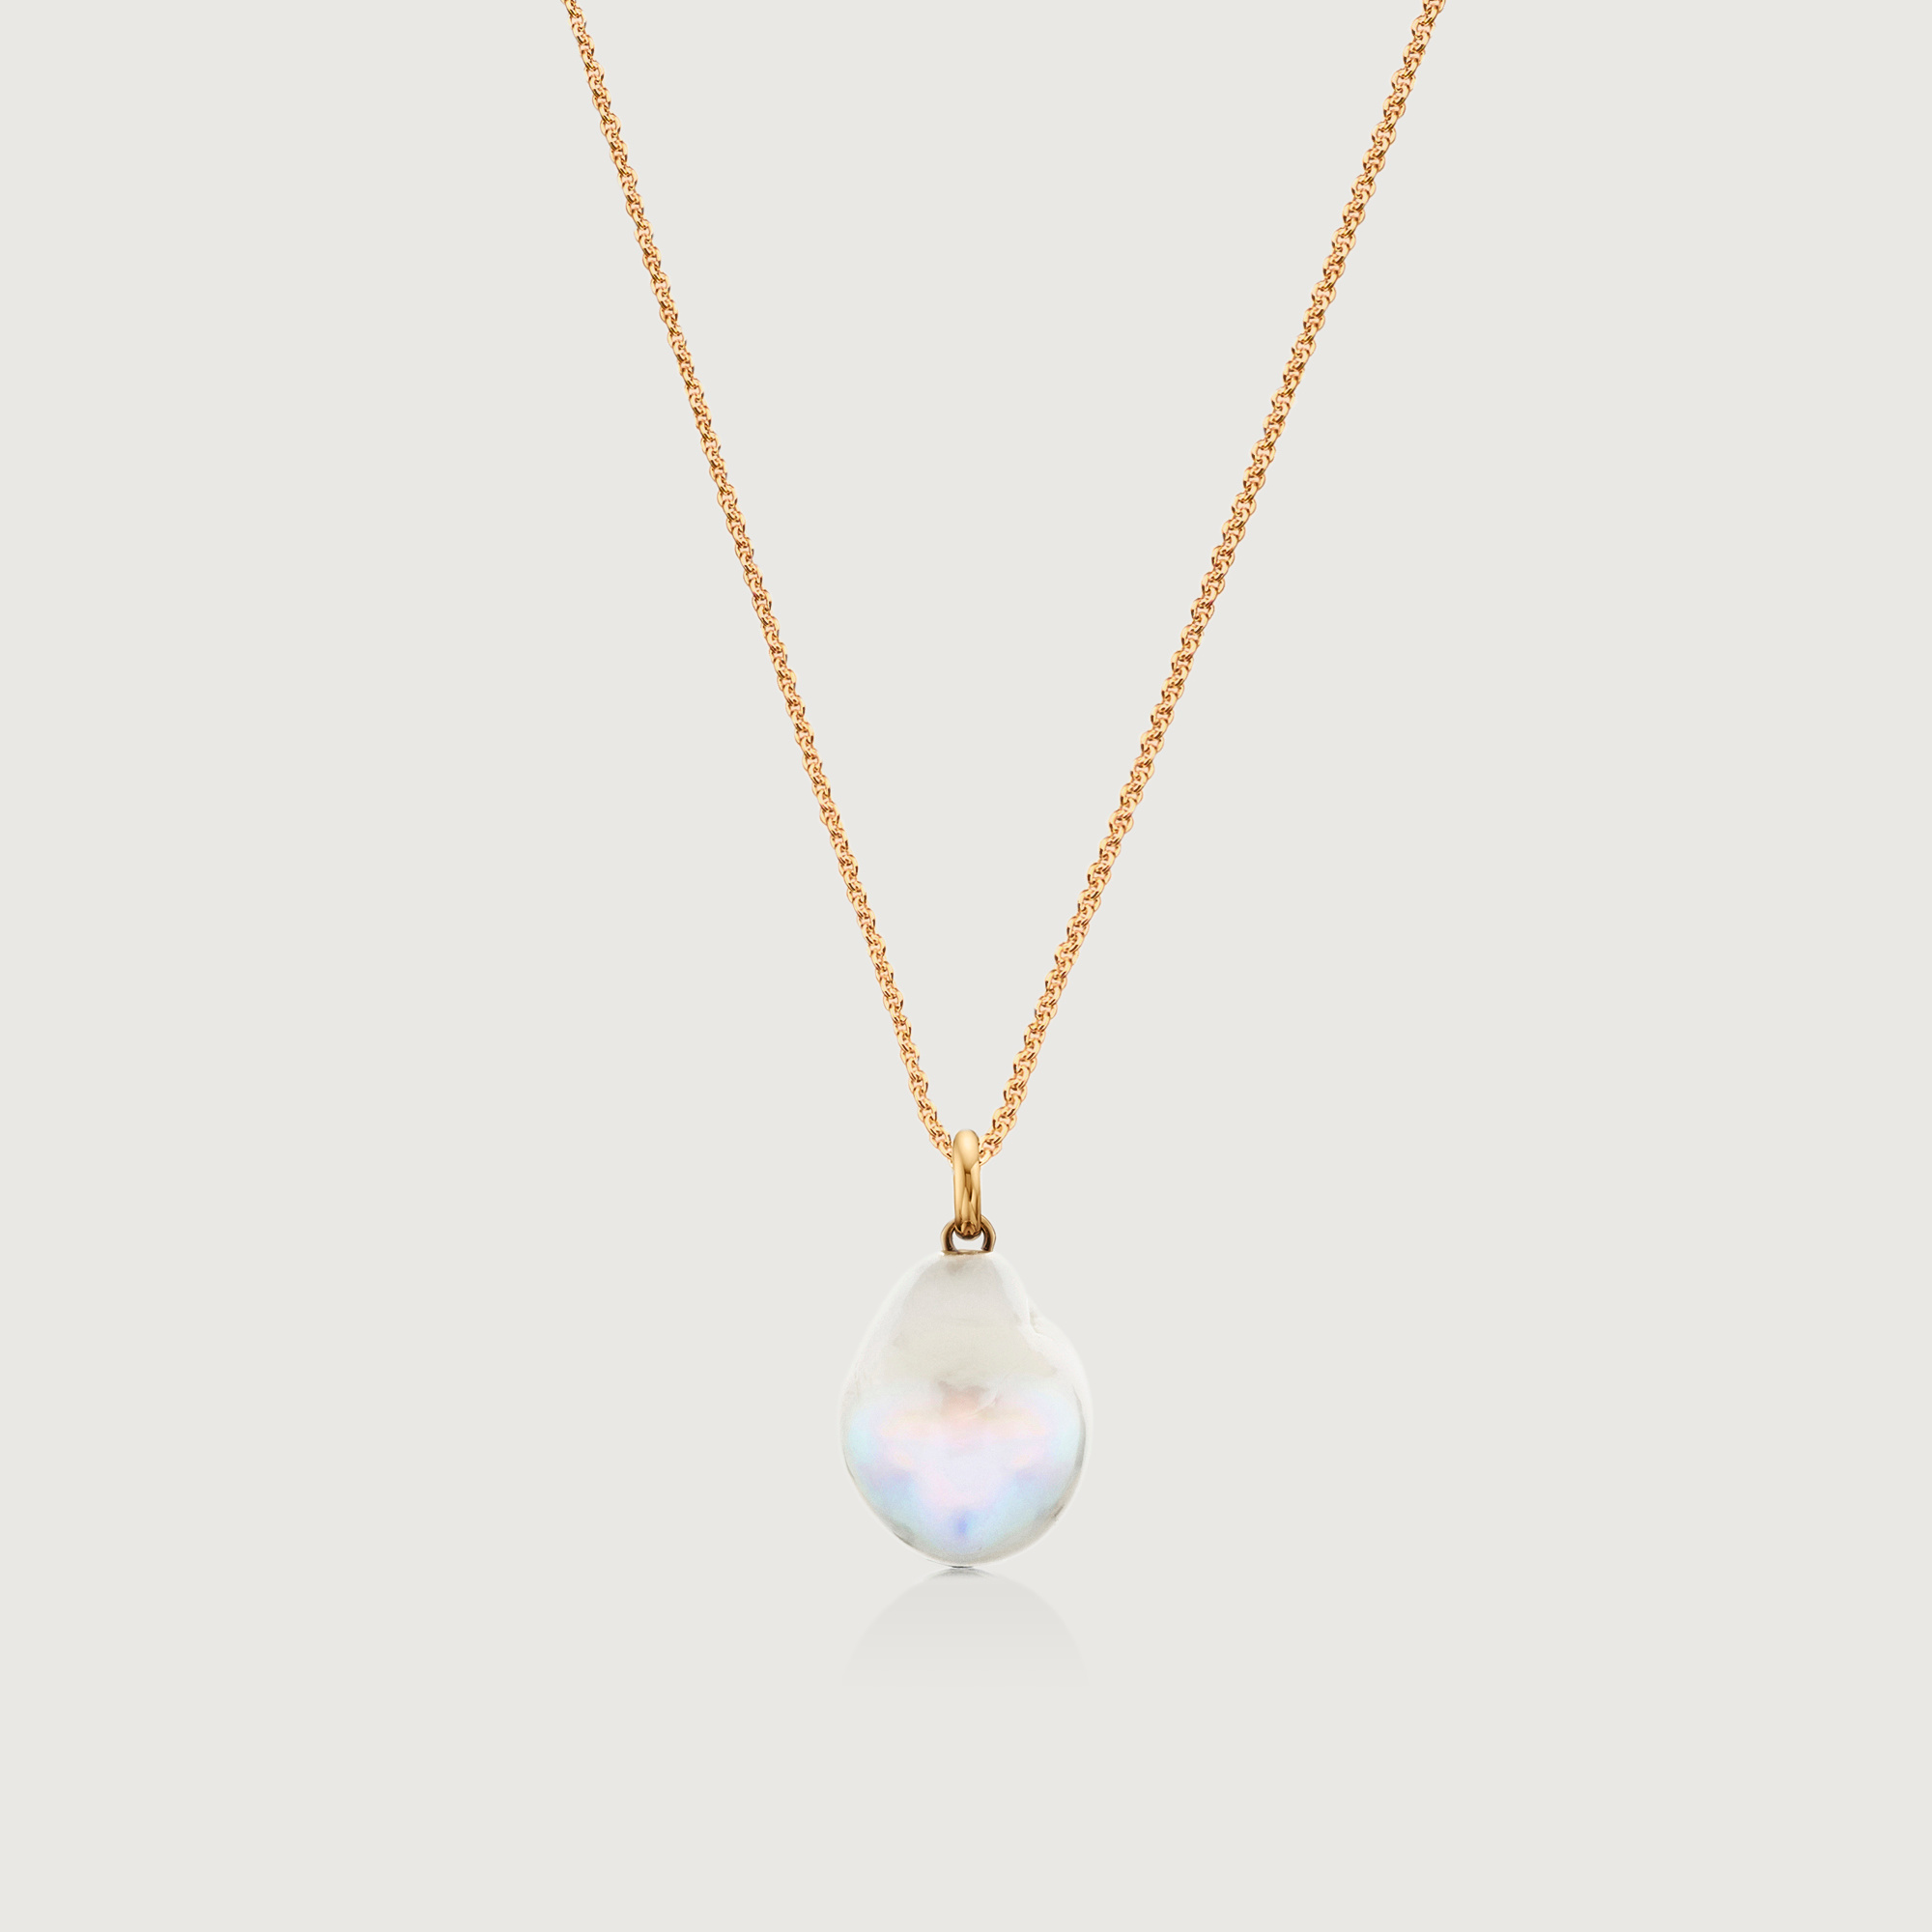 A gold chain with a flat pearl